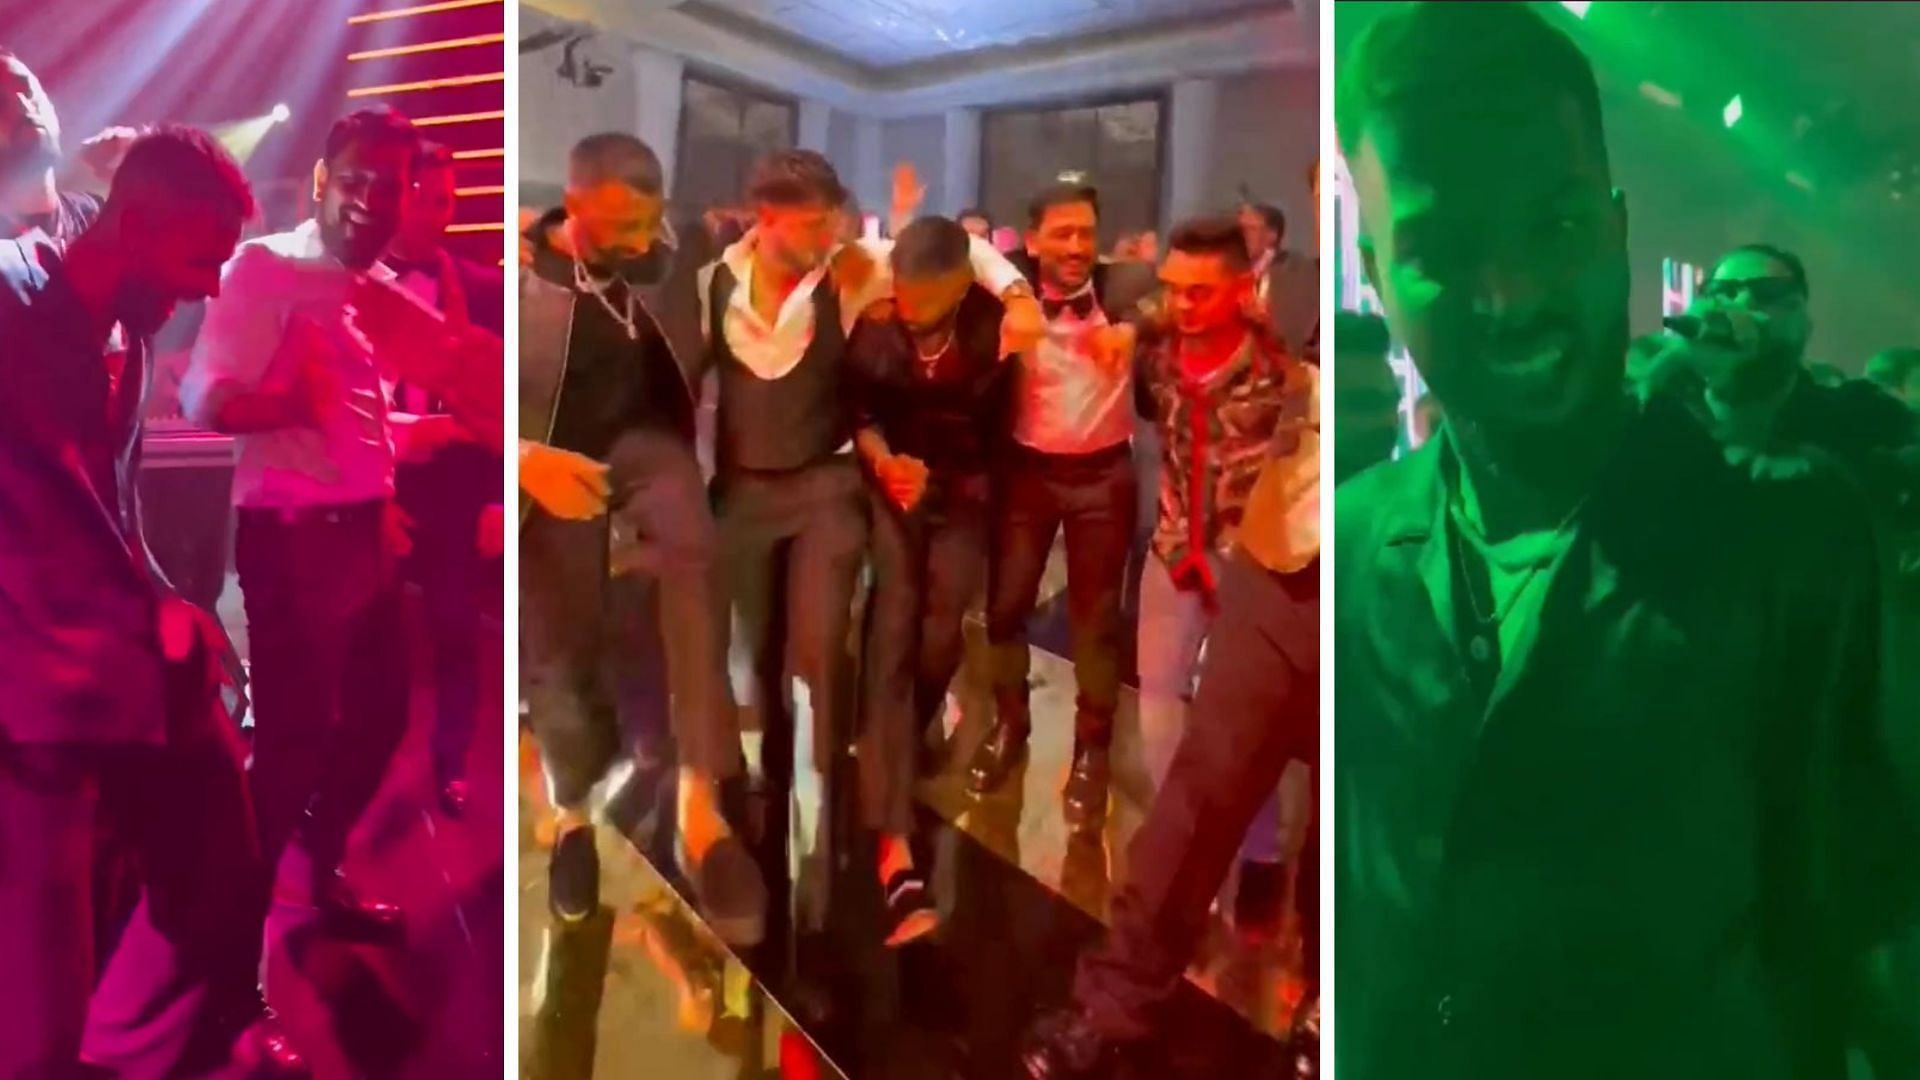 MSD looked in terrific dancing form in his latest viral video.